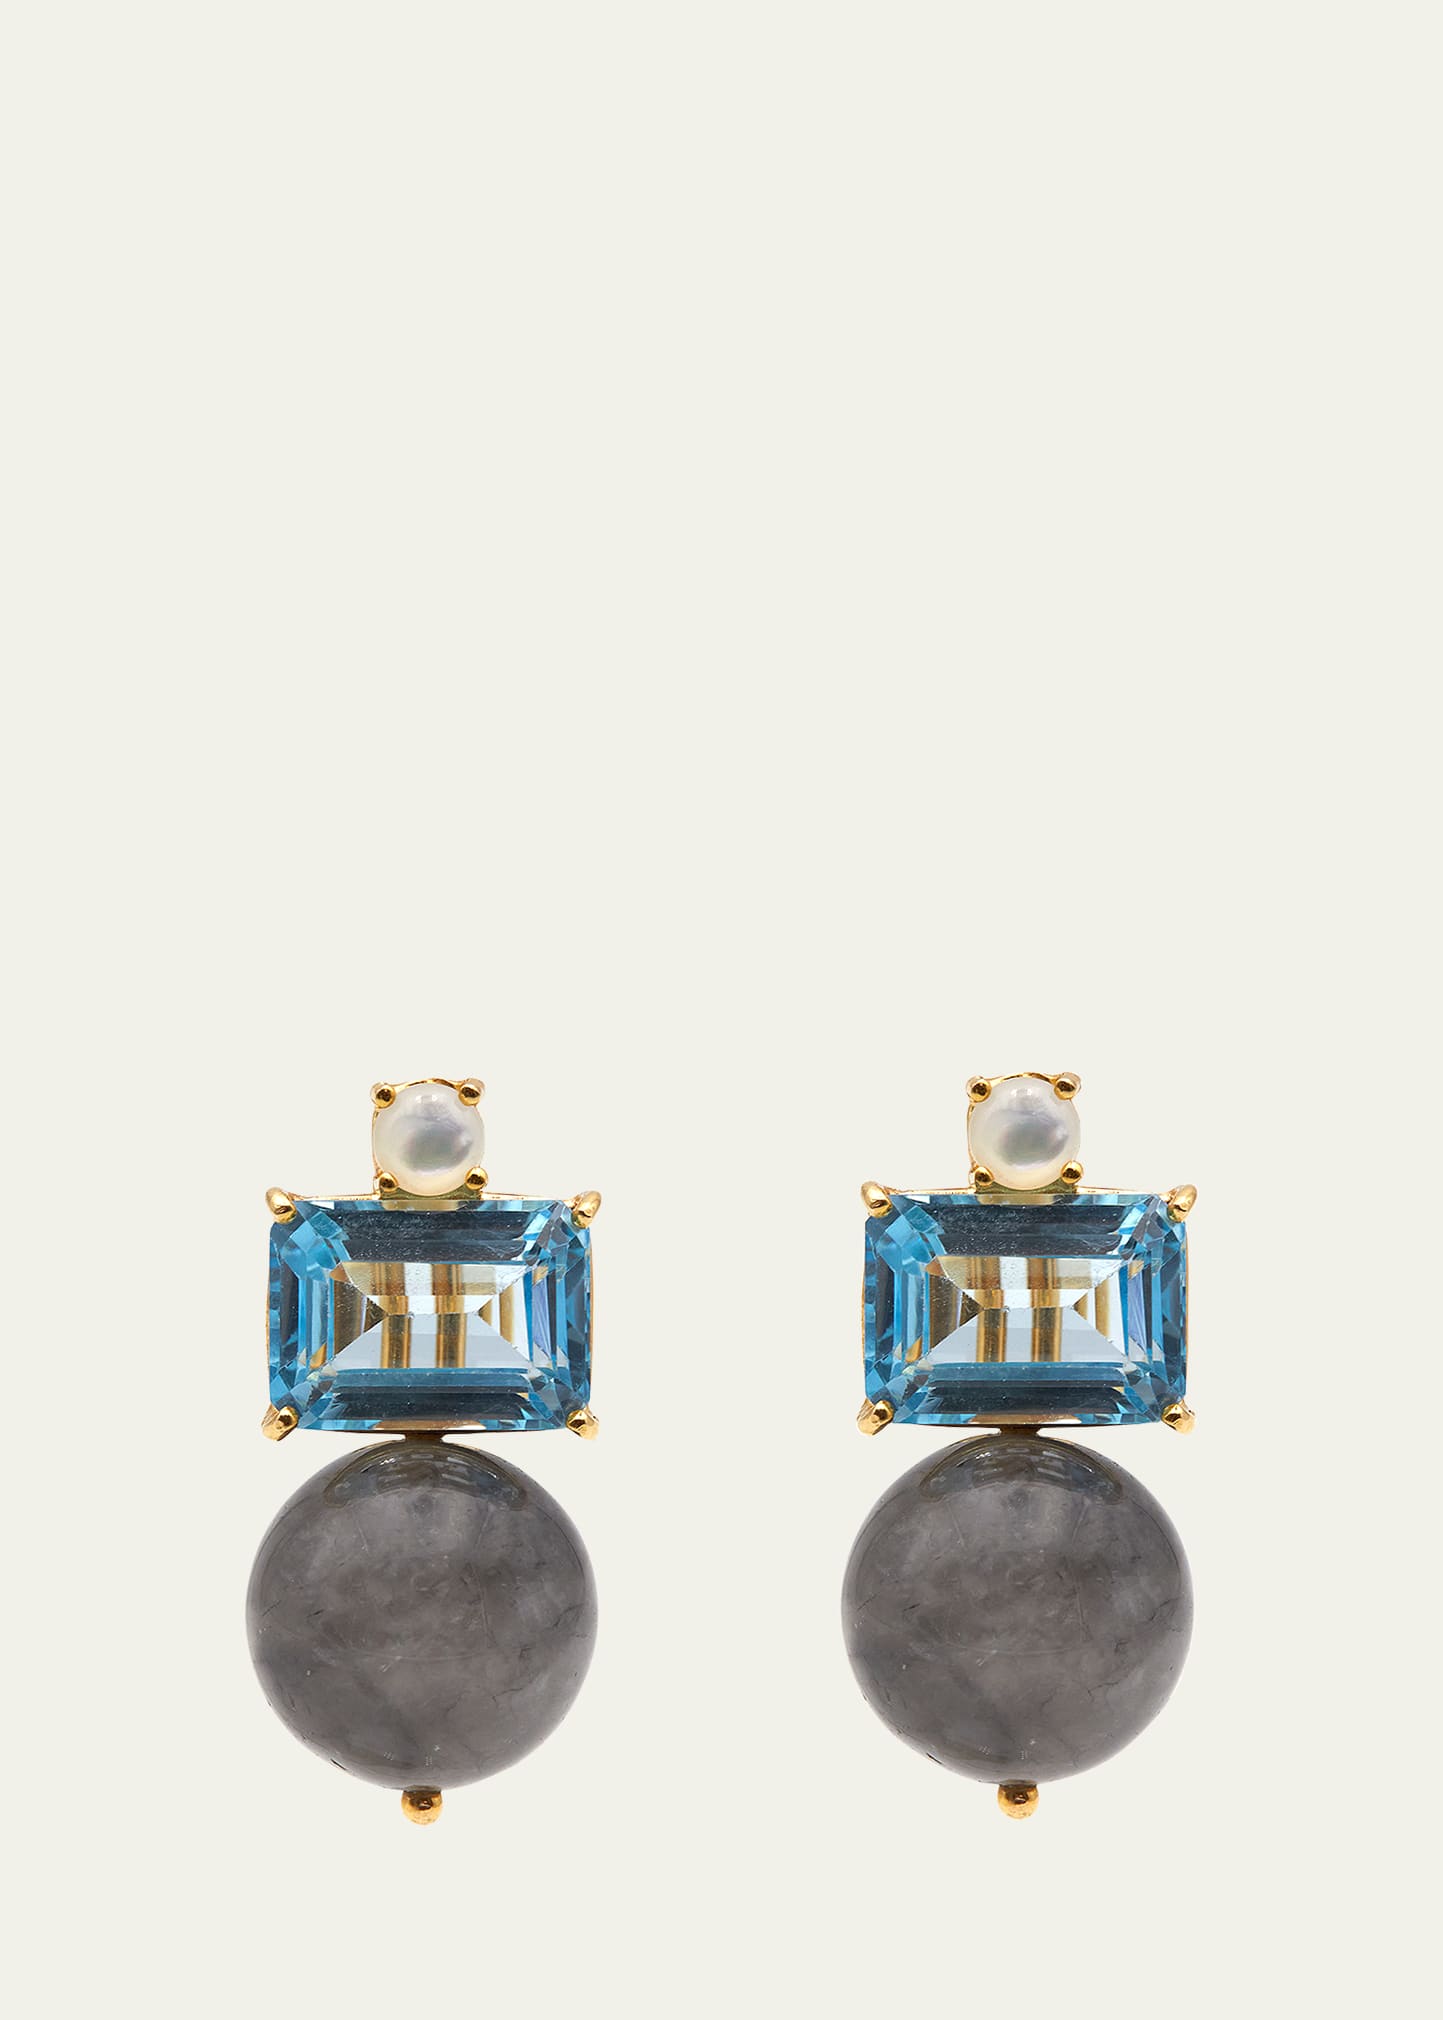 Grazia And Marica Vozza 14k Yellow Gold Stud Earrings With Labradorite, Blue Quartz And Mother-of-pearl In Yg